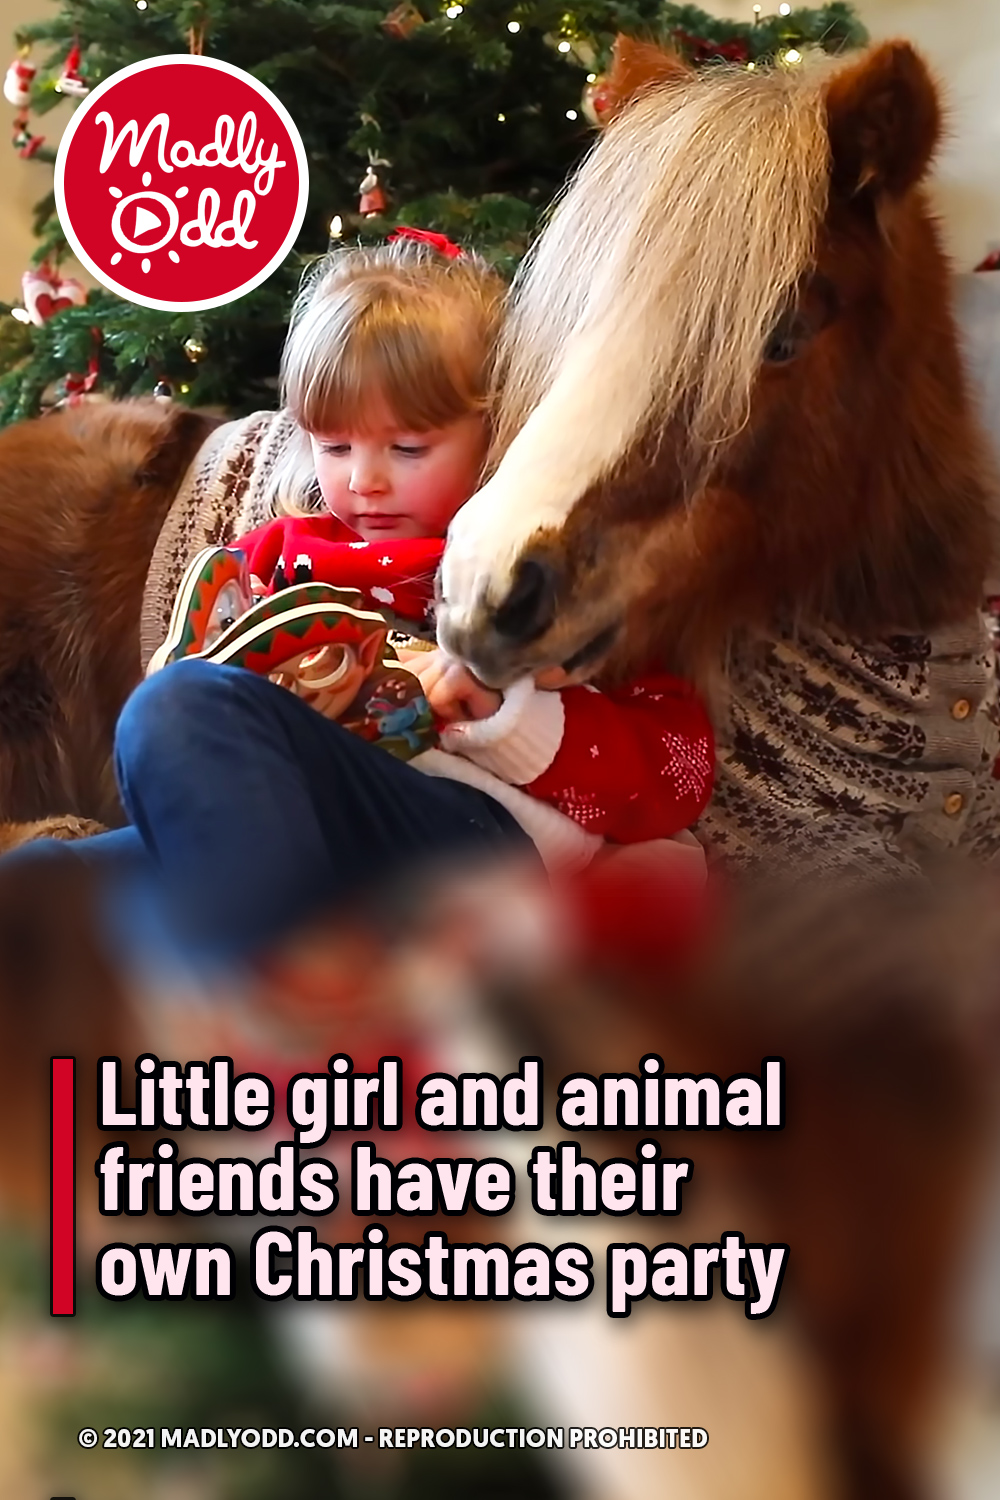 Little girl and animal friends have their own Christmas party